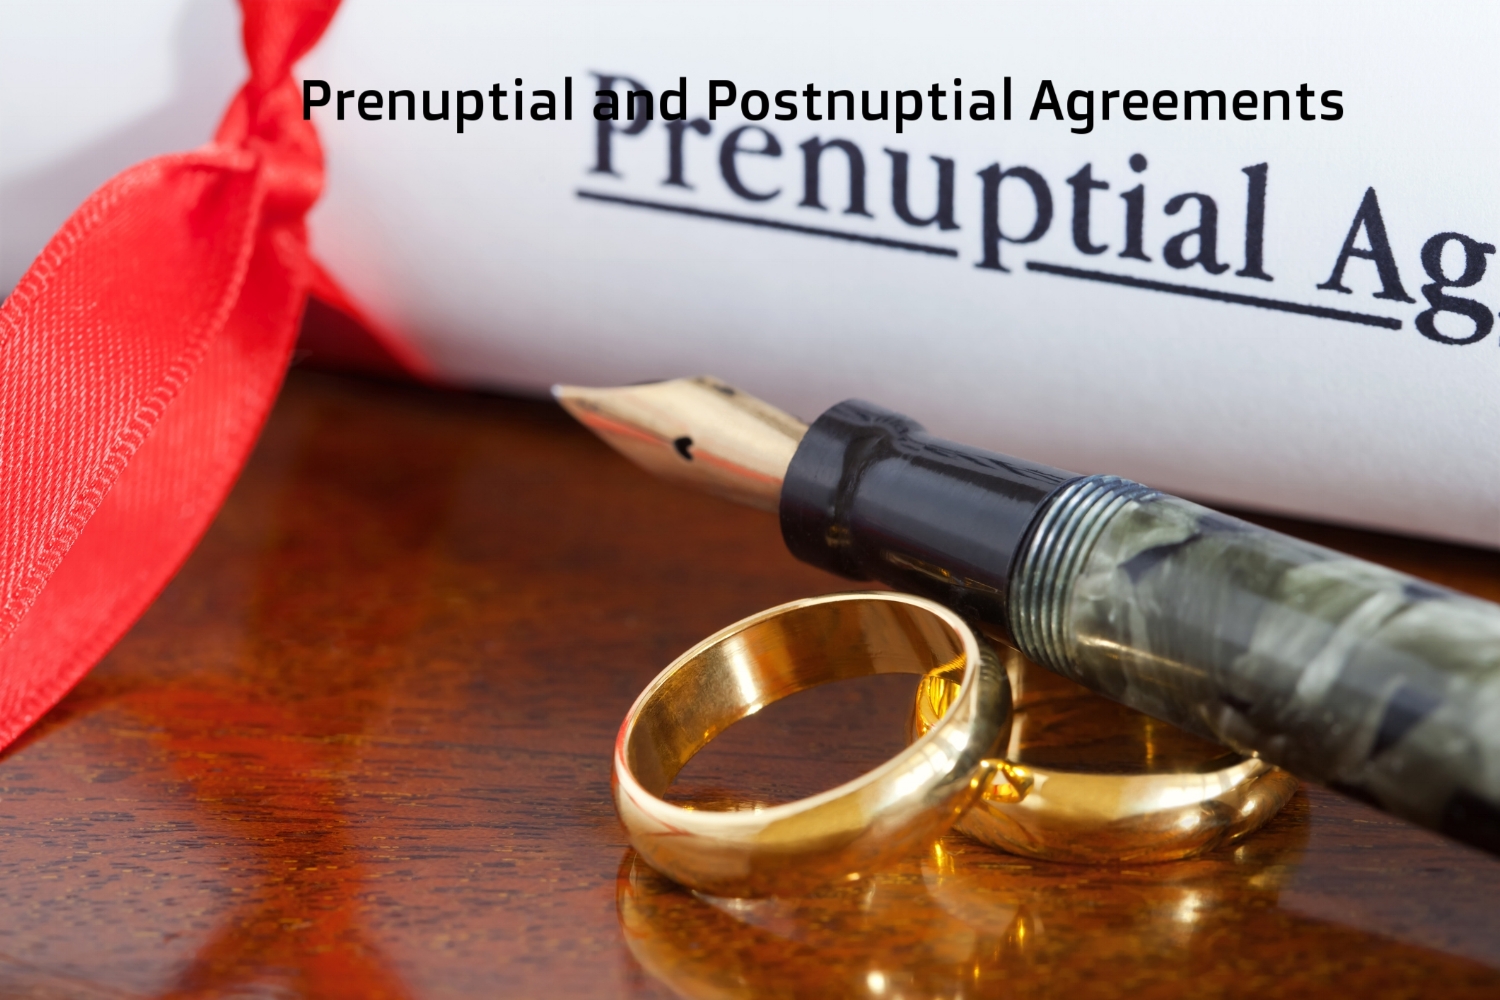 Copy of Prenuptial and Postnuptial Agreements